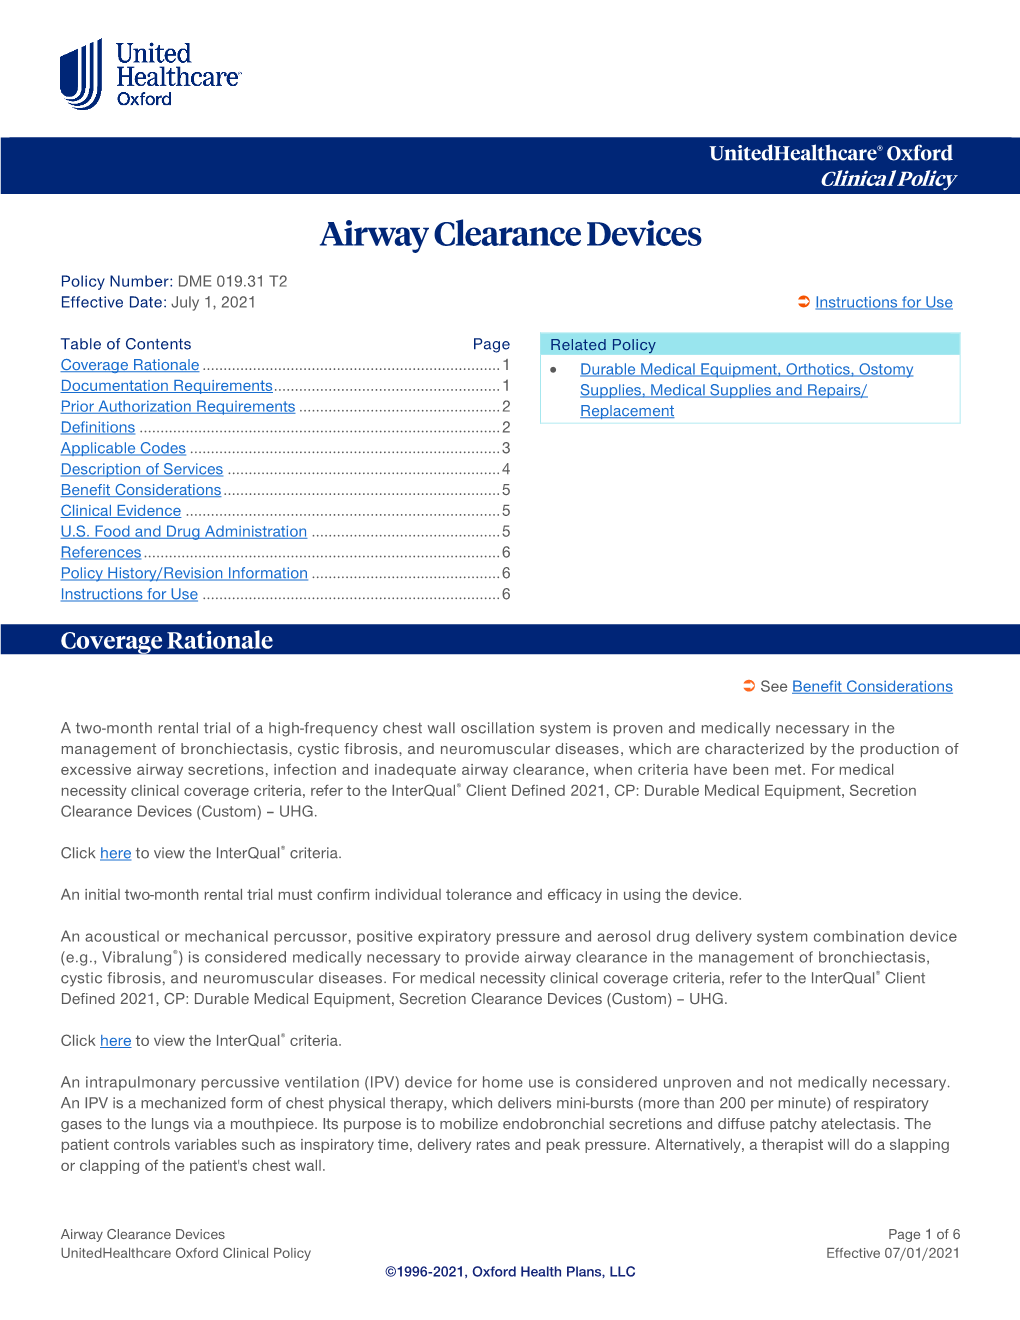 Airway Clearance Devices – Oxford Clinical Policy